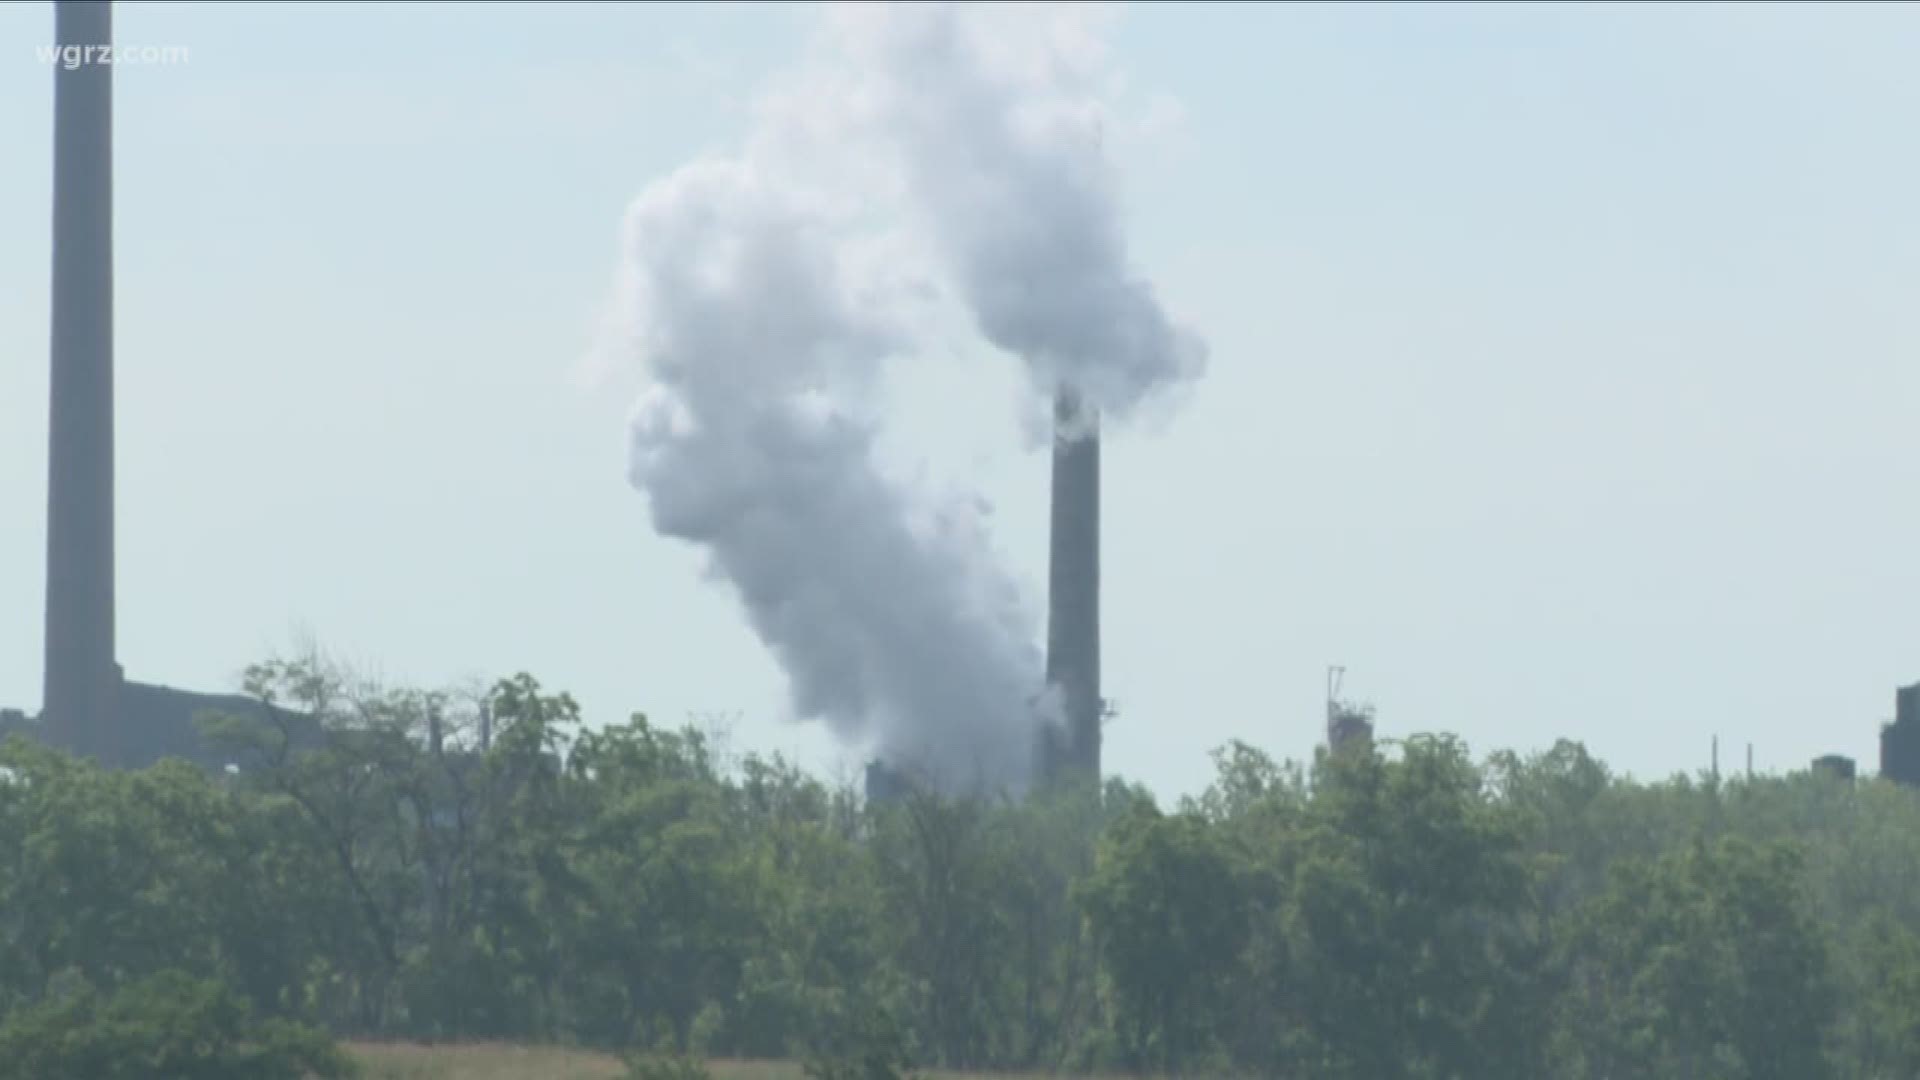 Tonawanda coke finances studies are being carried  out according to plans approved by the court